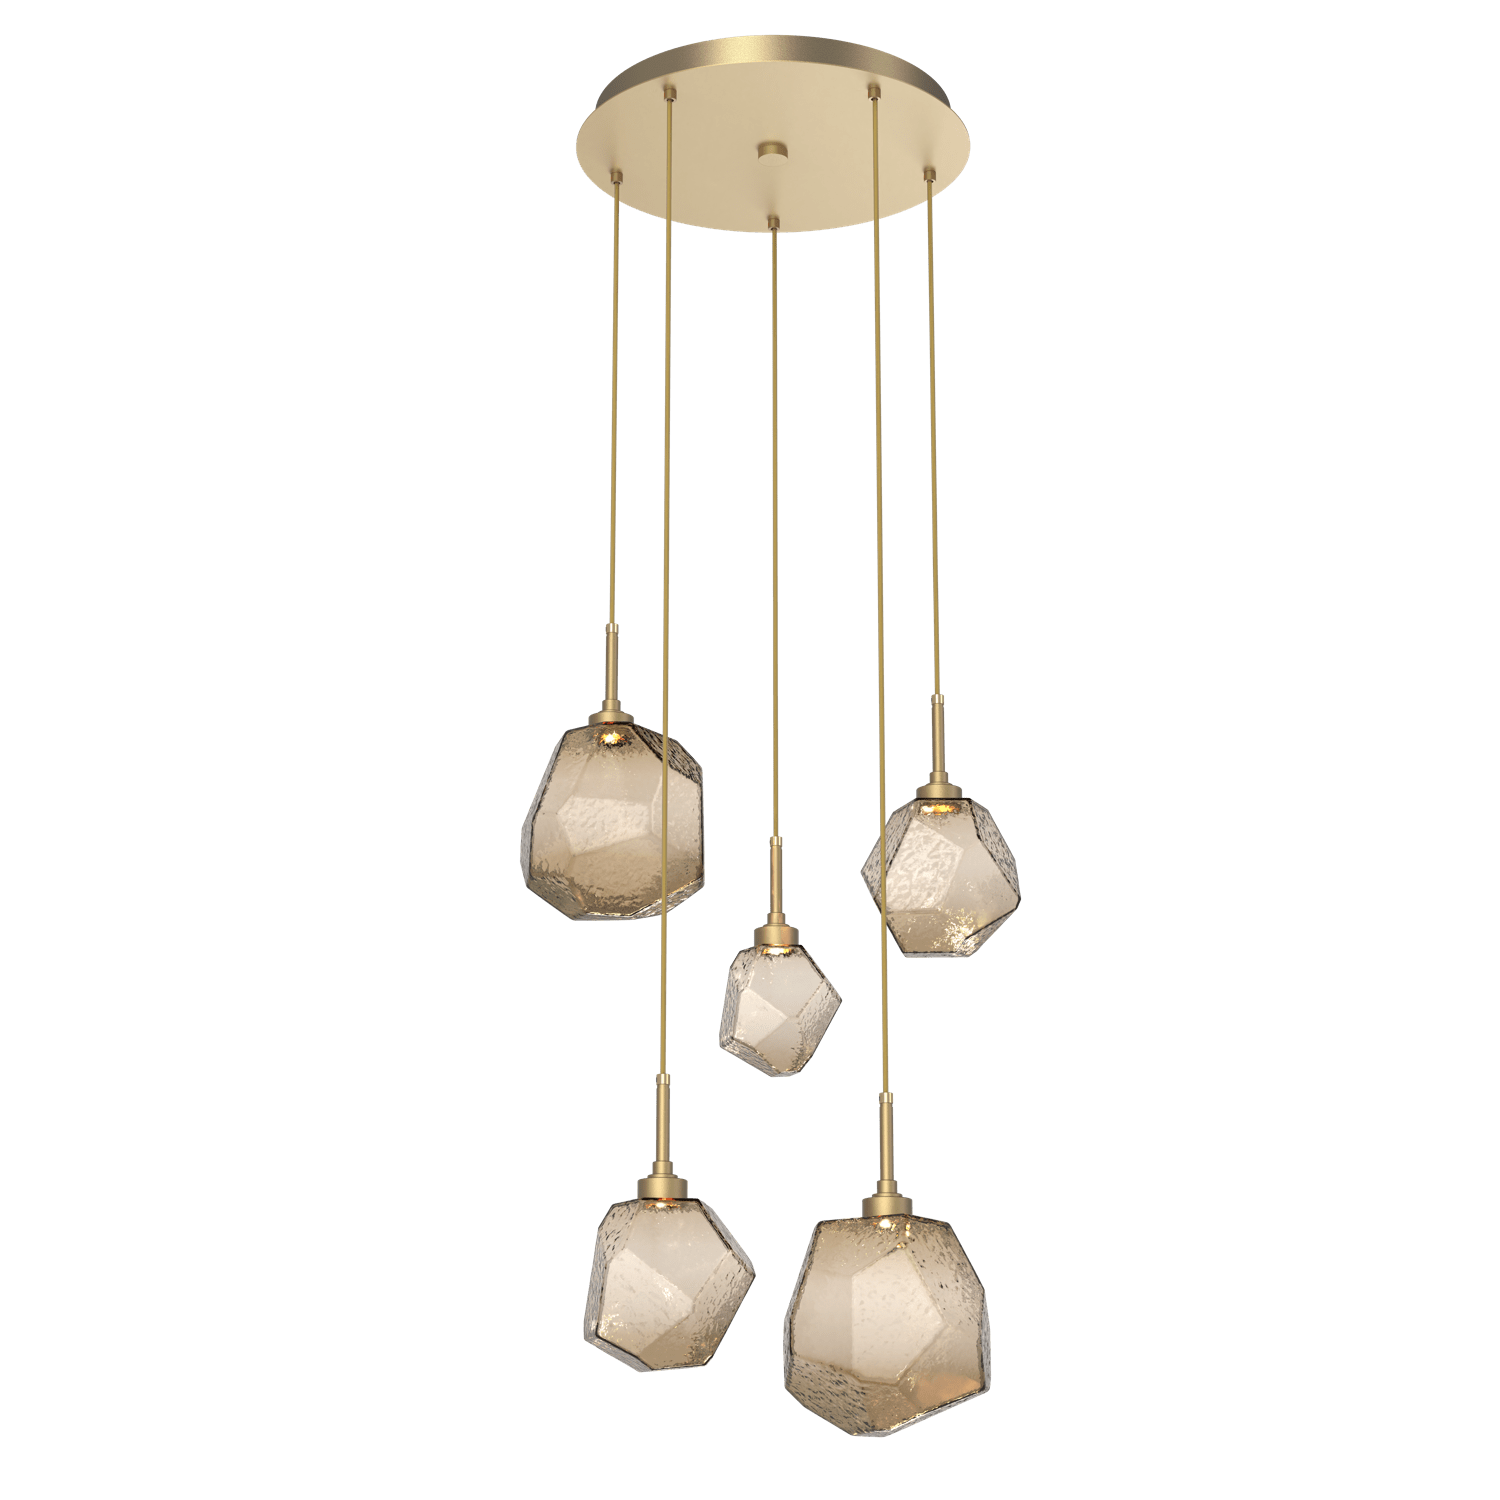 CHB0039-05-GB-B-Hammerton-Studio-Gem-5-light-round-pendant-chandelier-with-gilded-brass-finish-and-bronze-blown-glass-shades-and-LED-lamping